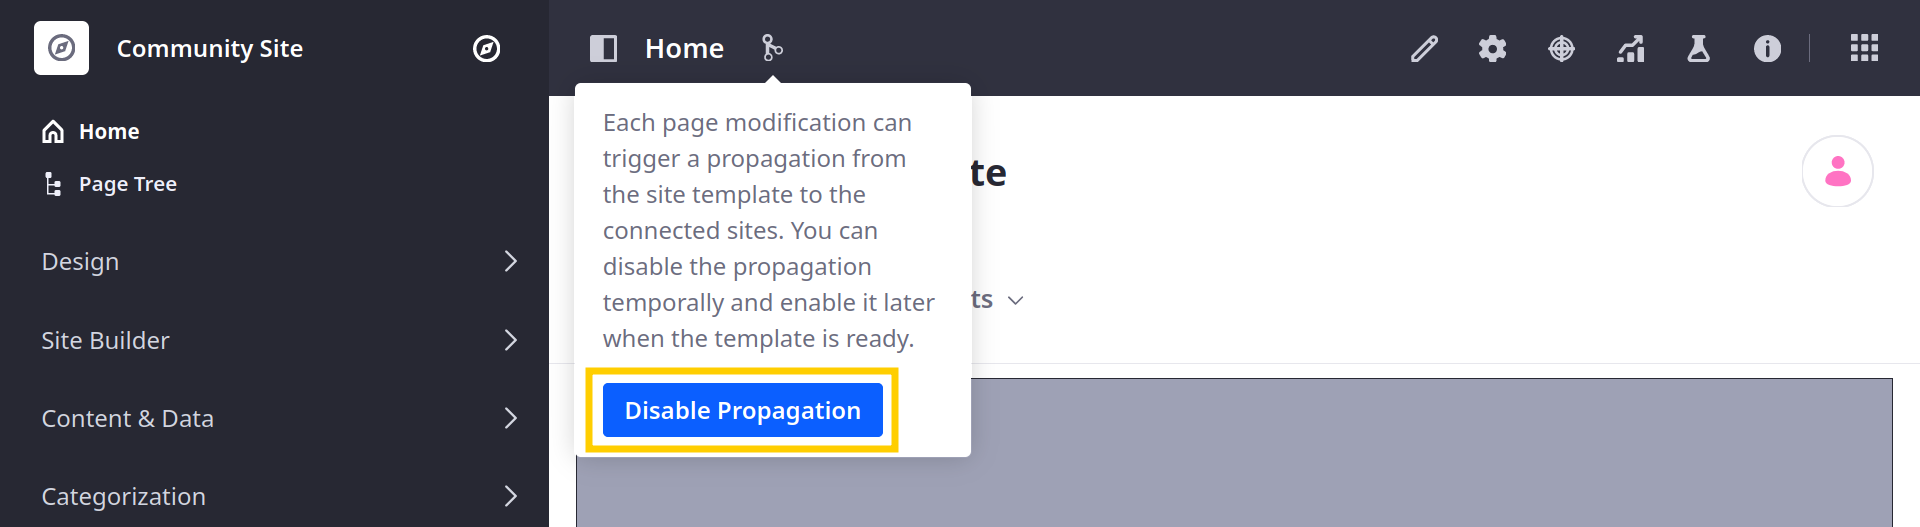 If Propagation is enabled, click Disable Propagation.